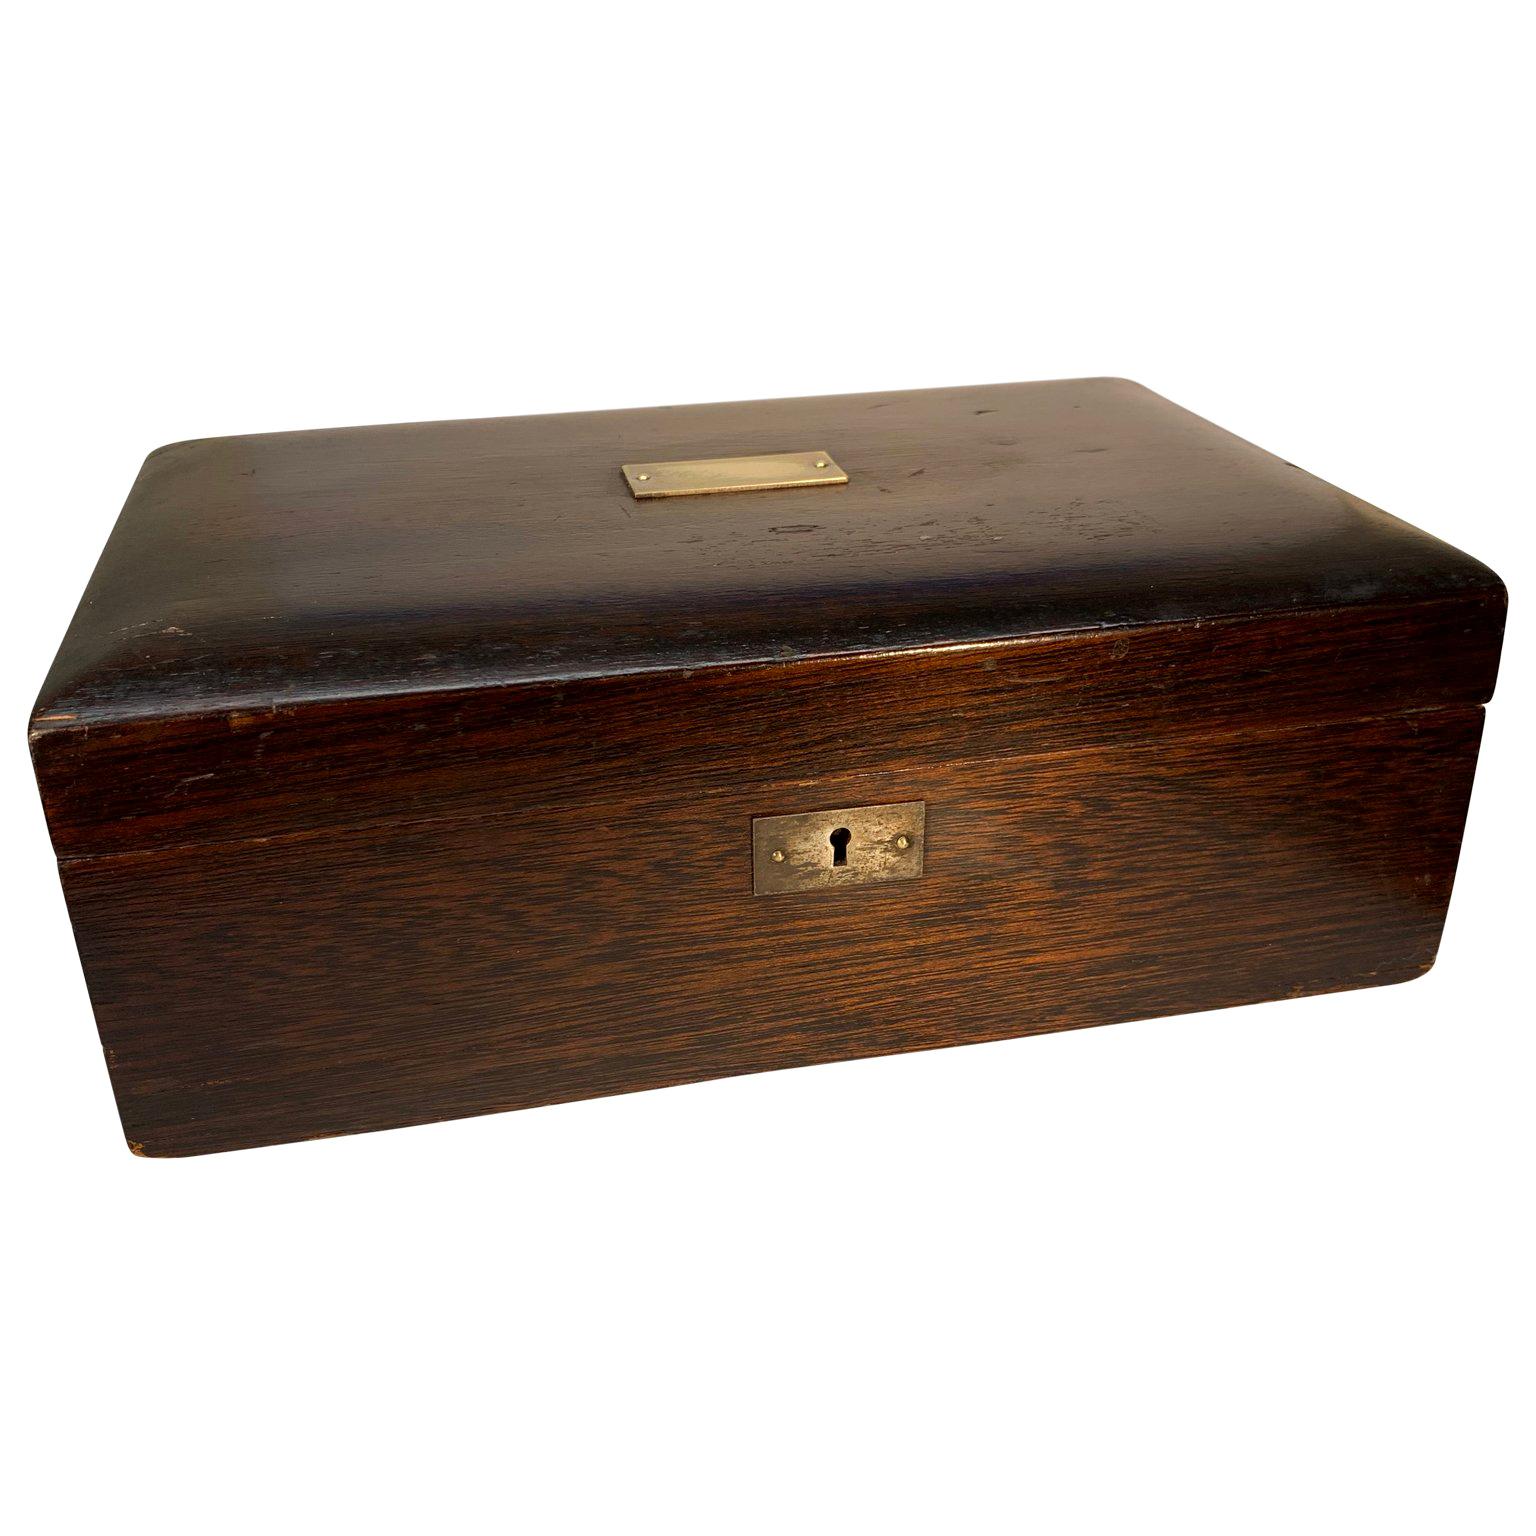 Late 19th Century Wooden Box with Polished Zinc Insert and Brass Plaque